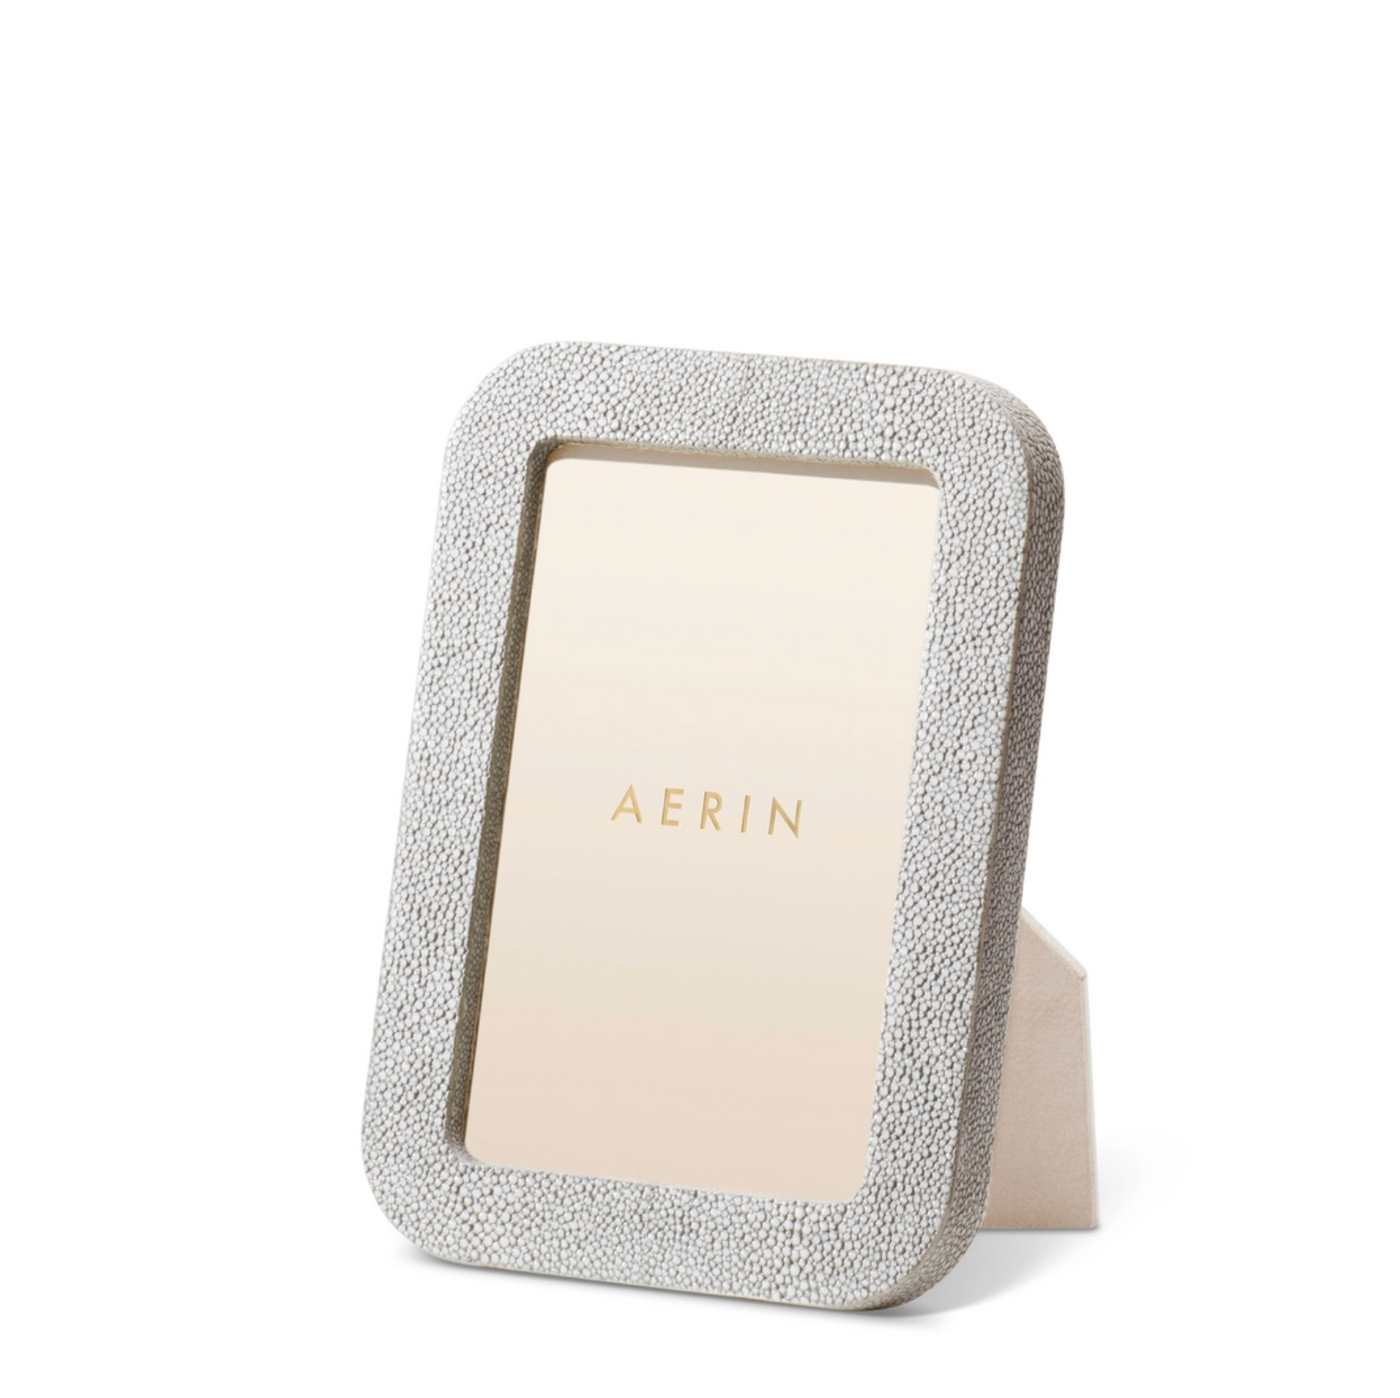 AERIN FRAME MODERN SHAGREEN DOVE (Available in 3 Sizes)